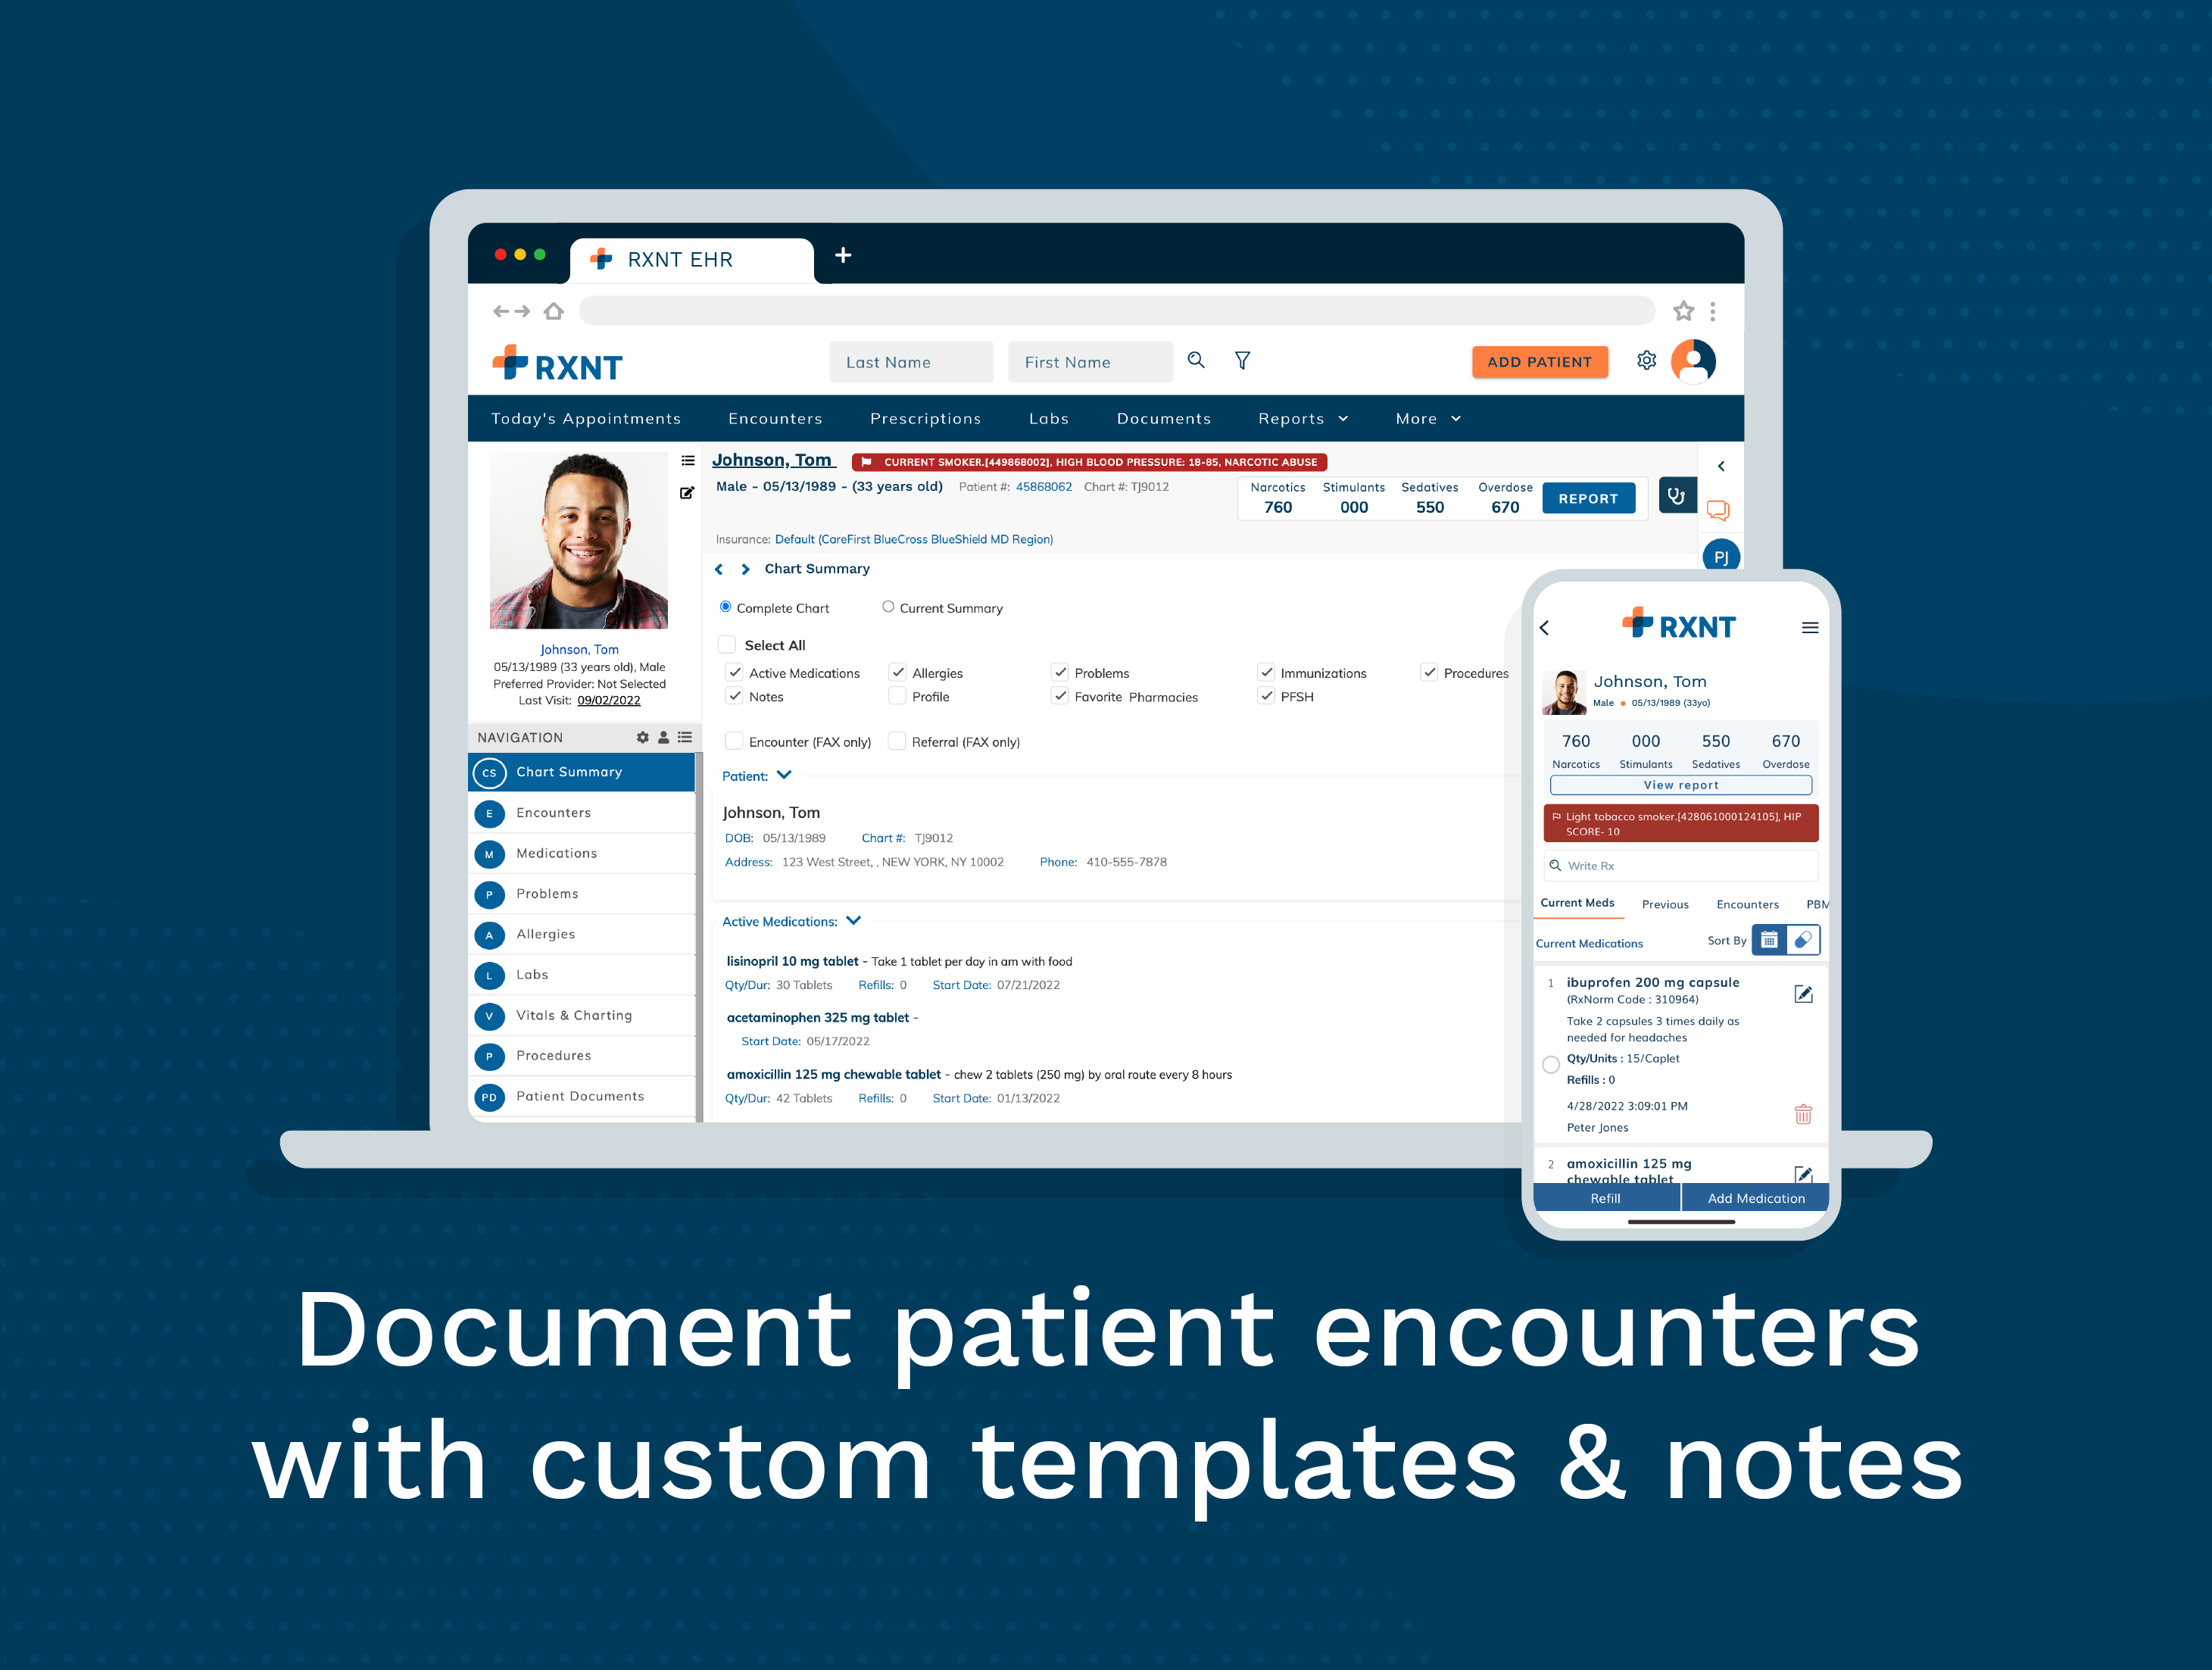 RXNT Electronic Health Records (EHR/EMR) Software. Manage your patient's complete health information, with custom encounters, notes & forms, past medications, allergies, labs, and more. Available for desktop, tablet, & mobile (iOS & Android).